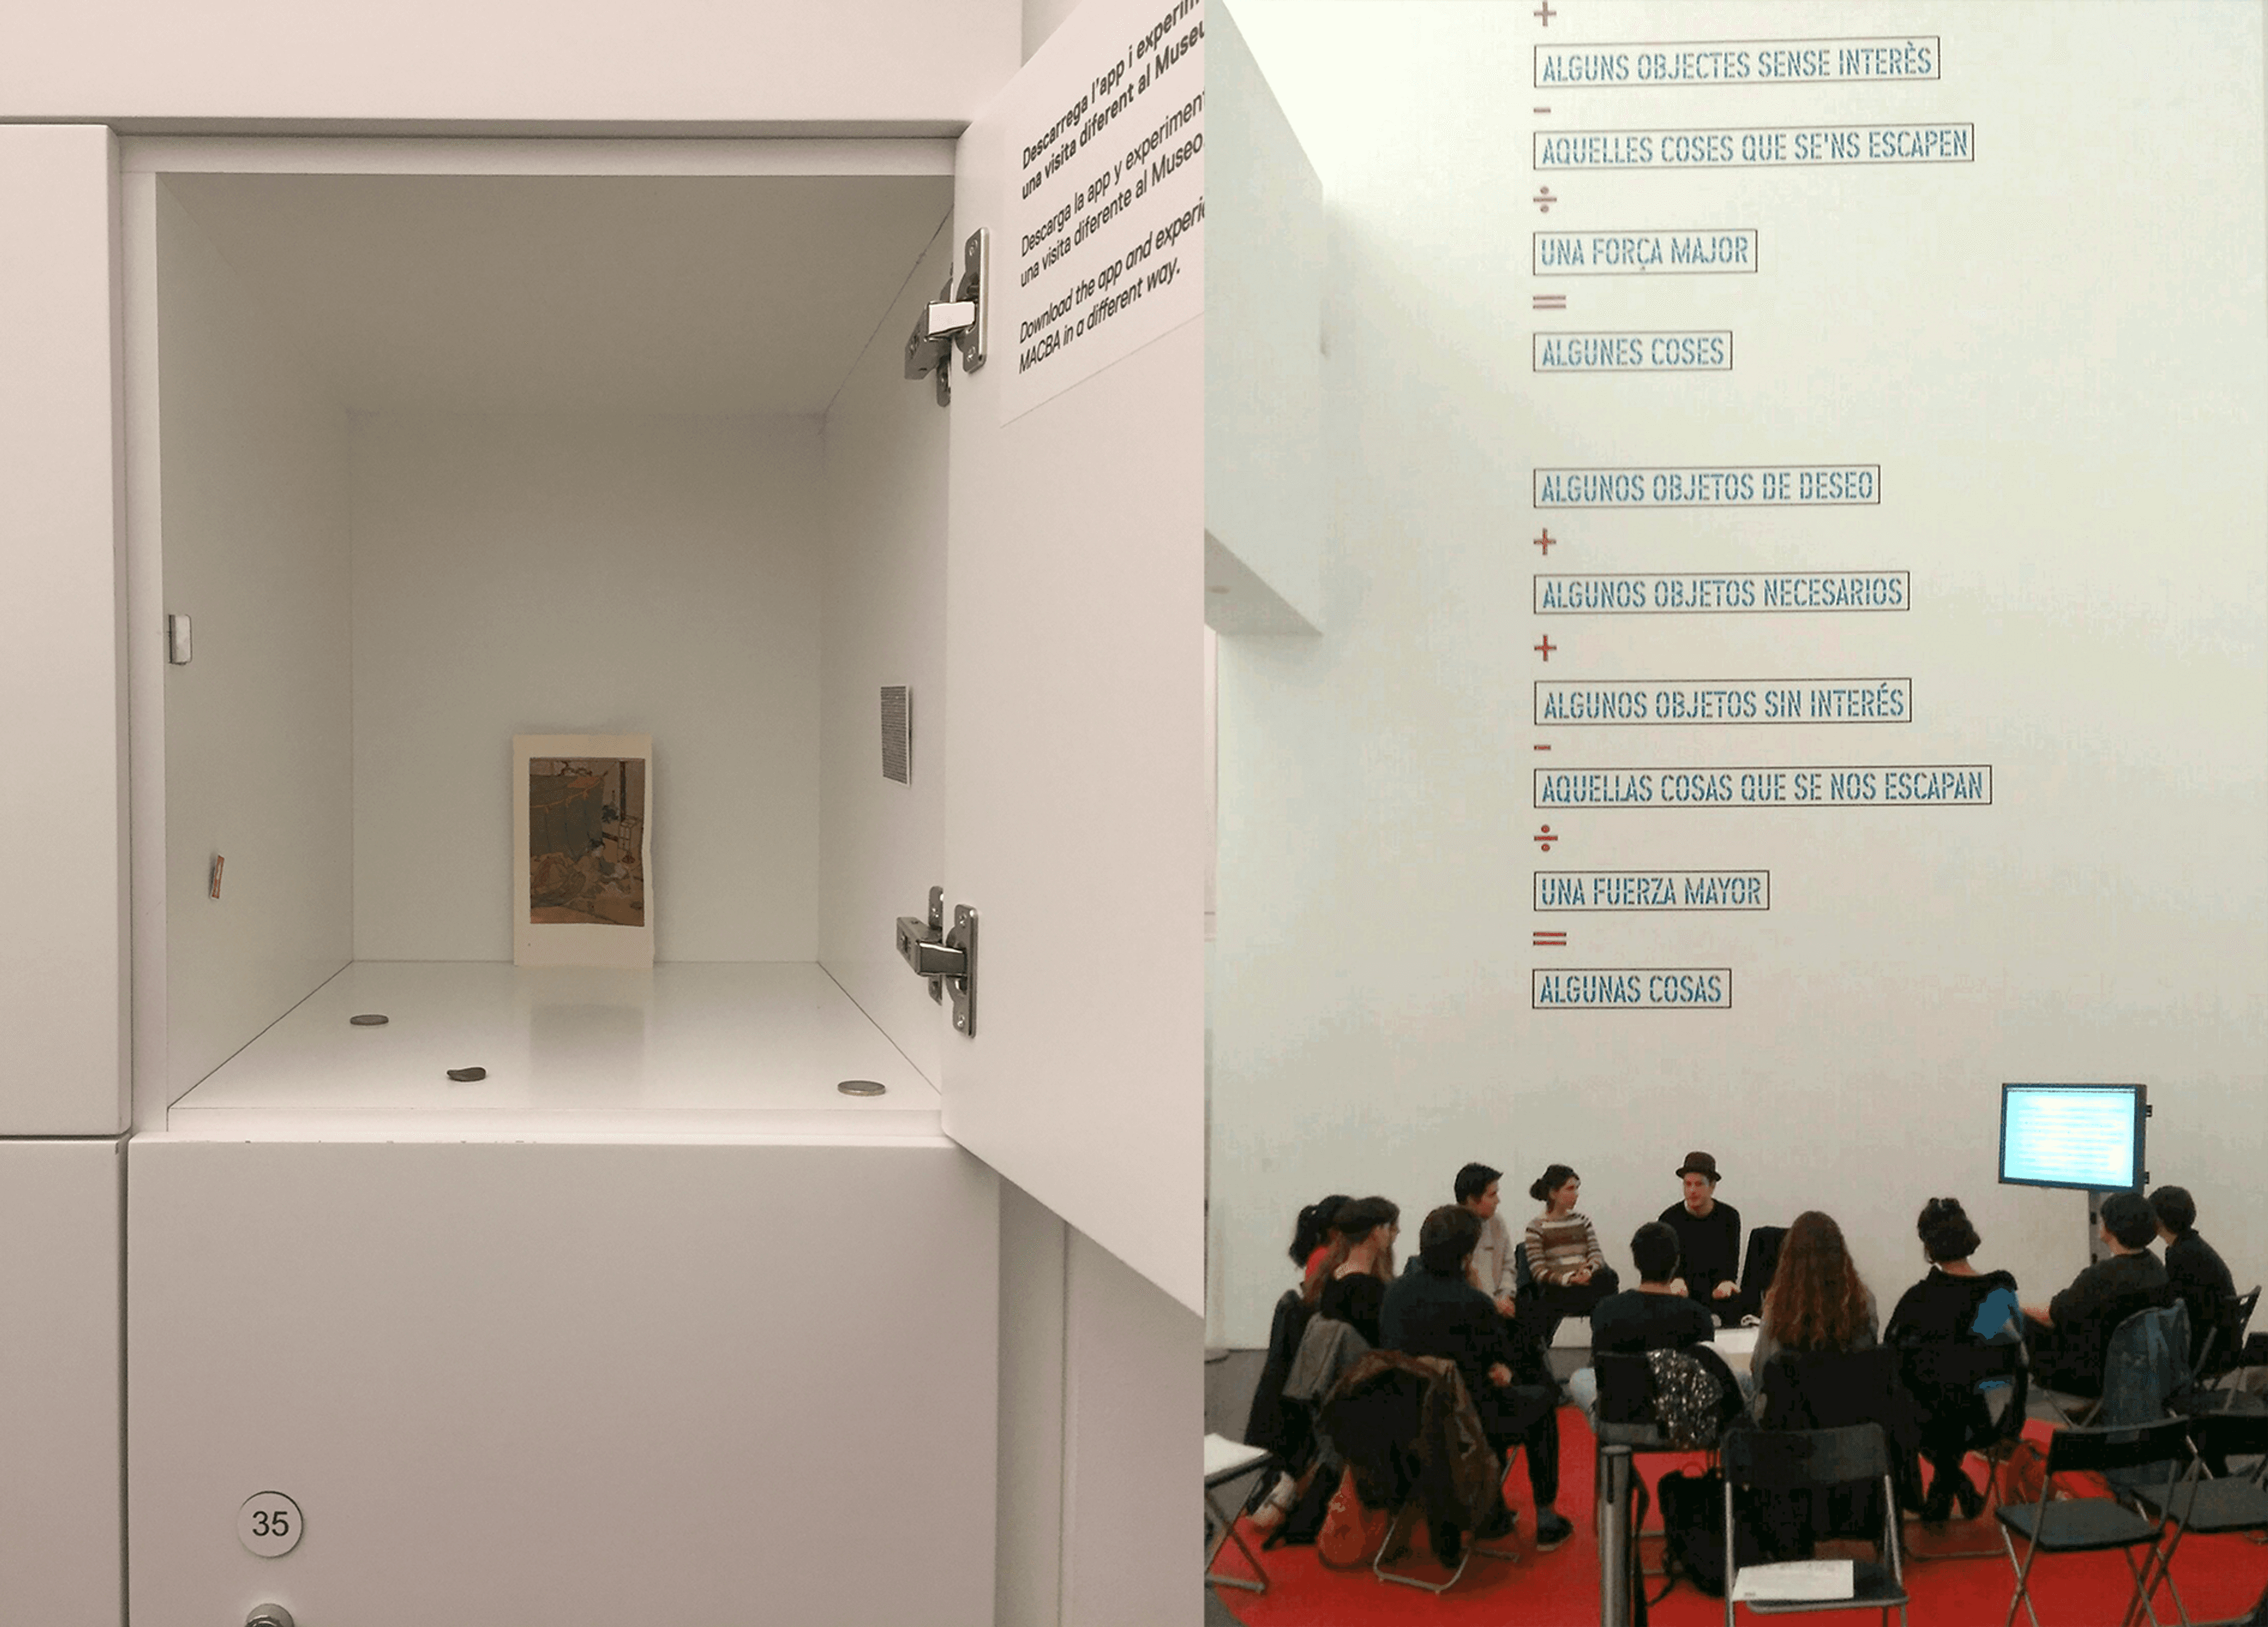 MACBA, Barcelona, Spain.

Curated by Jordi Ferreiro. Part of the collection is exhibited as a small exhibition inside the different lockers and the keys are distributed through the different rooms of the museum for the public to discover it freely. More information here.